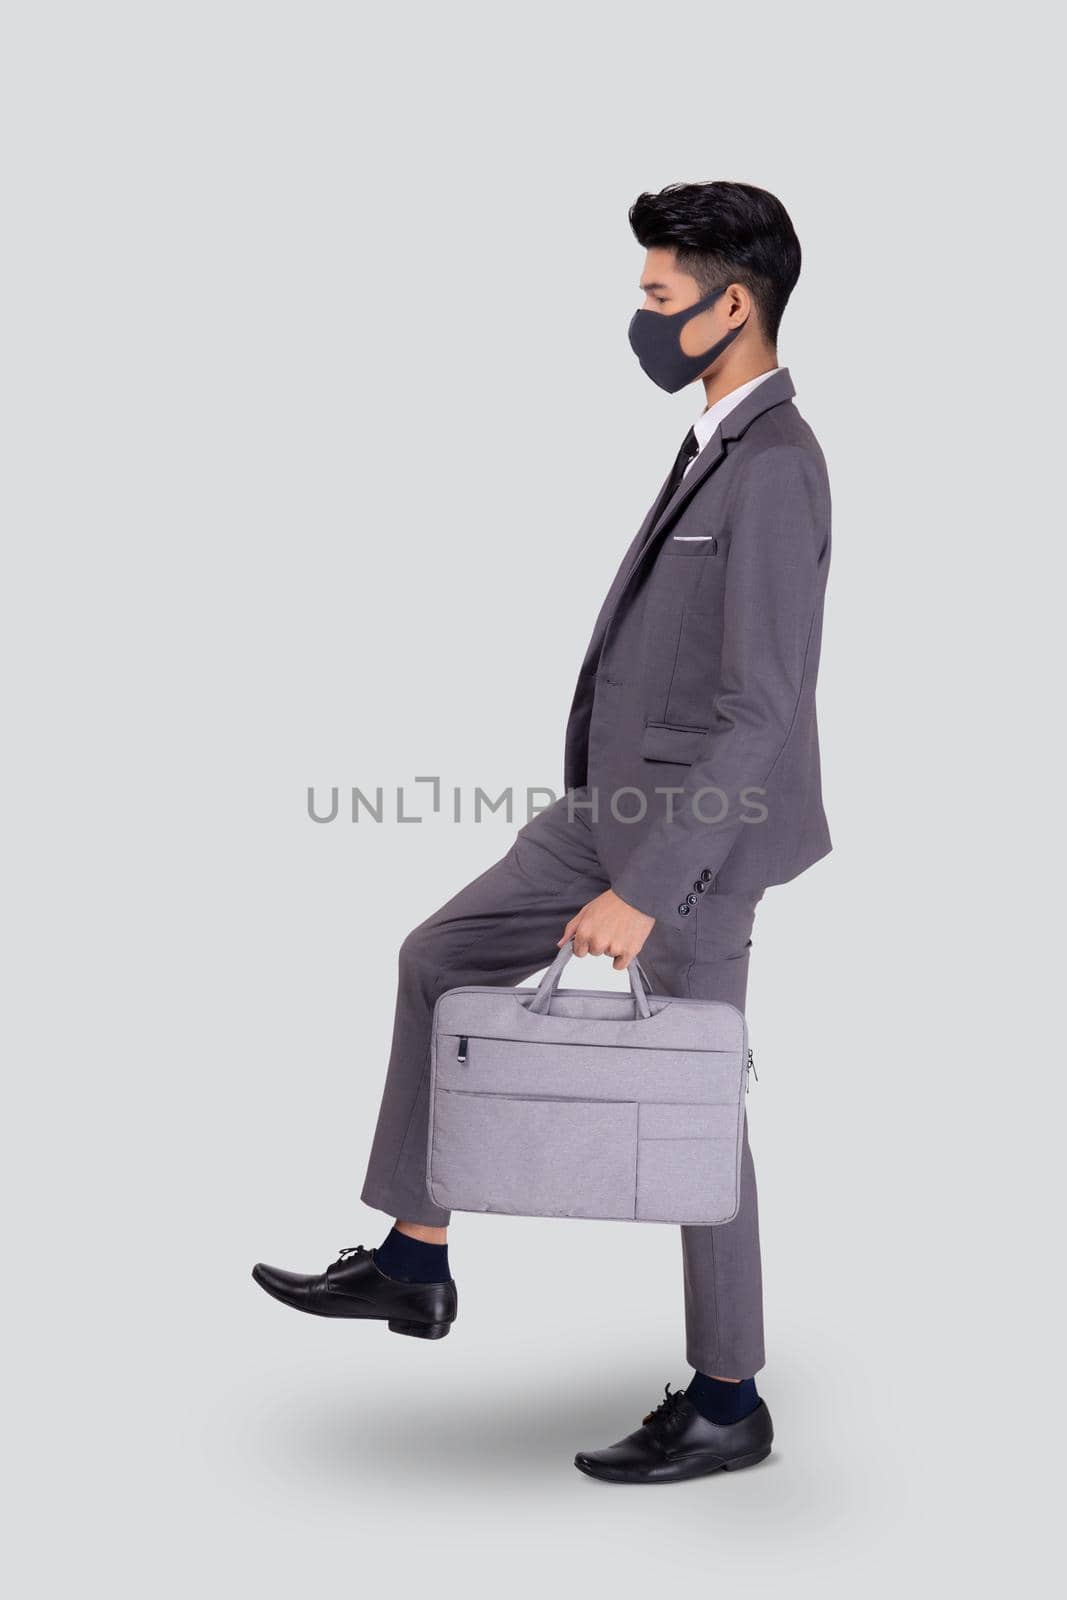 Portrait young asian businessman in suit wearing face mask walk step for protective covid-19 isolated on white background, business man and healthcare, quarantine for pandemic coronavirus, new normal.